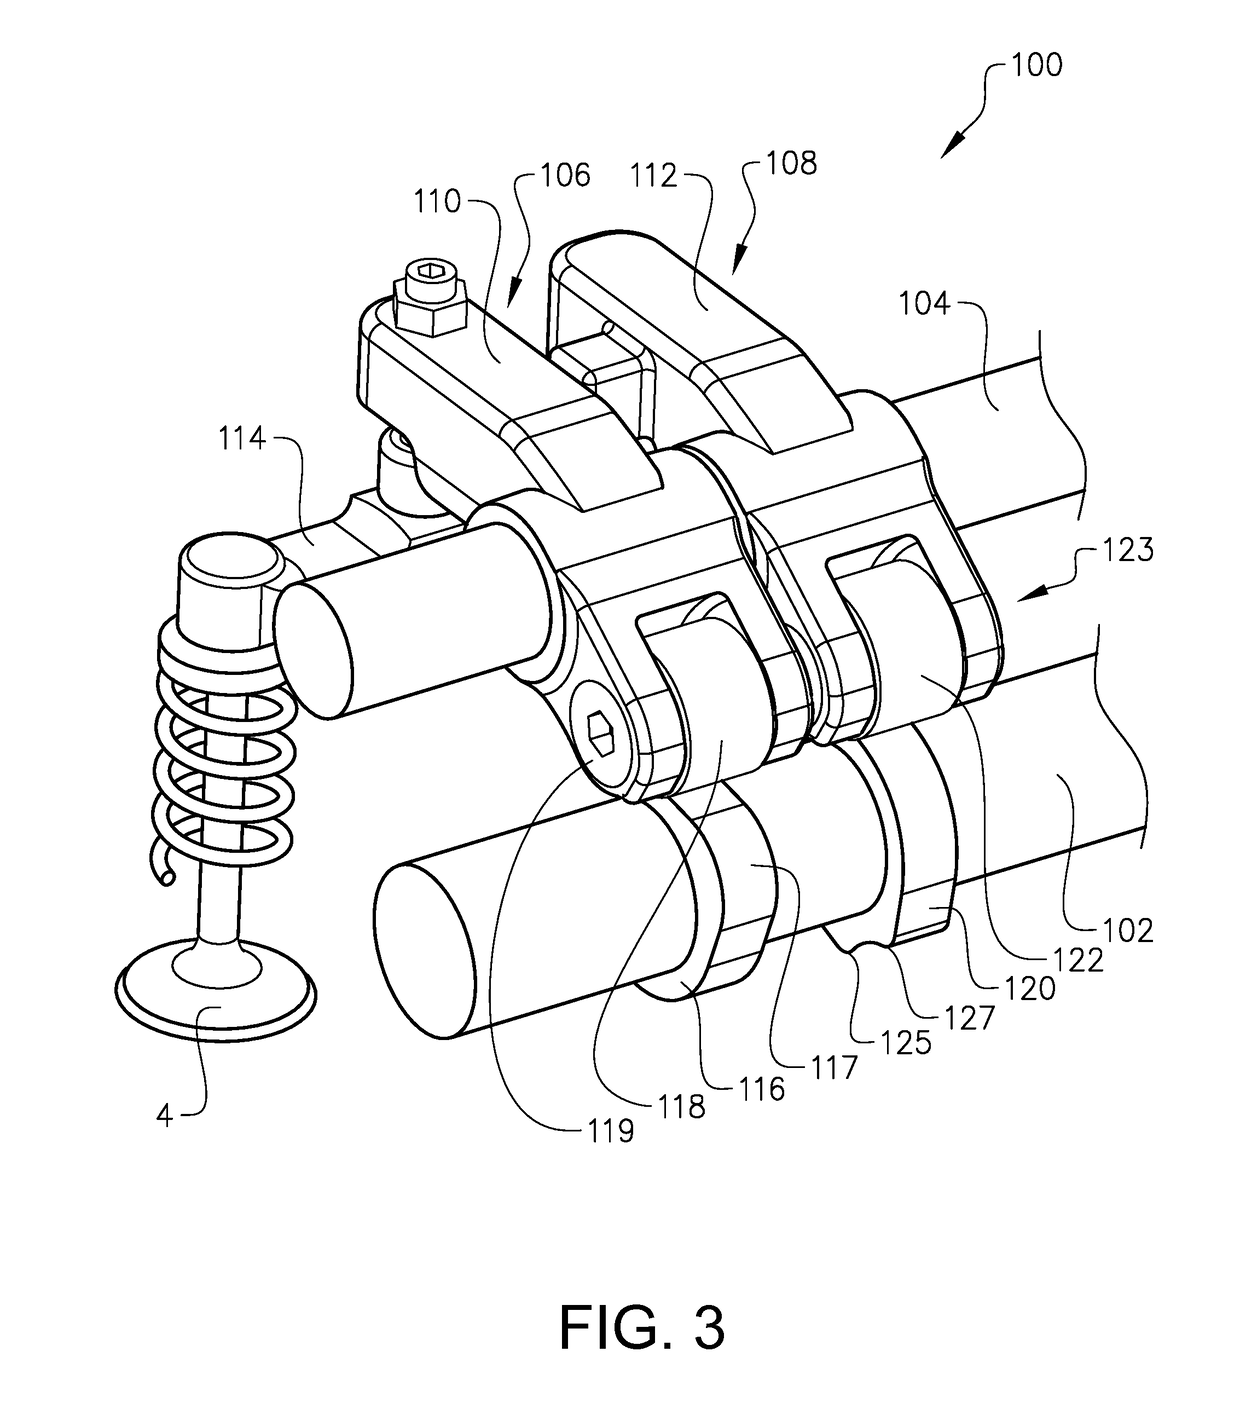 Device for controlling at least one valve in an internal combustion engine